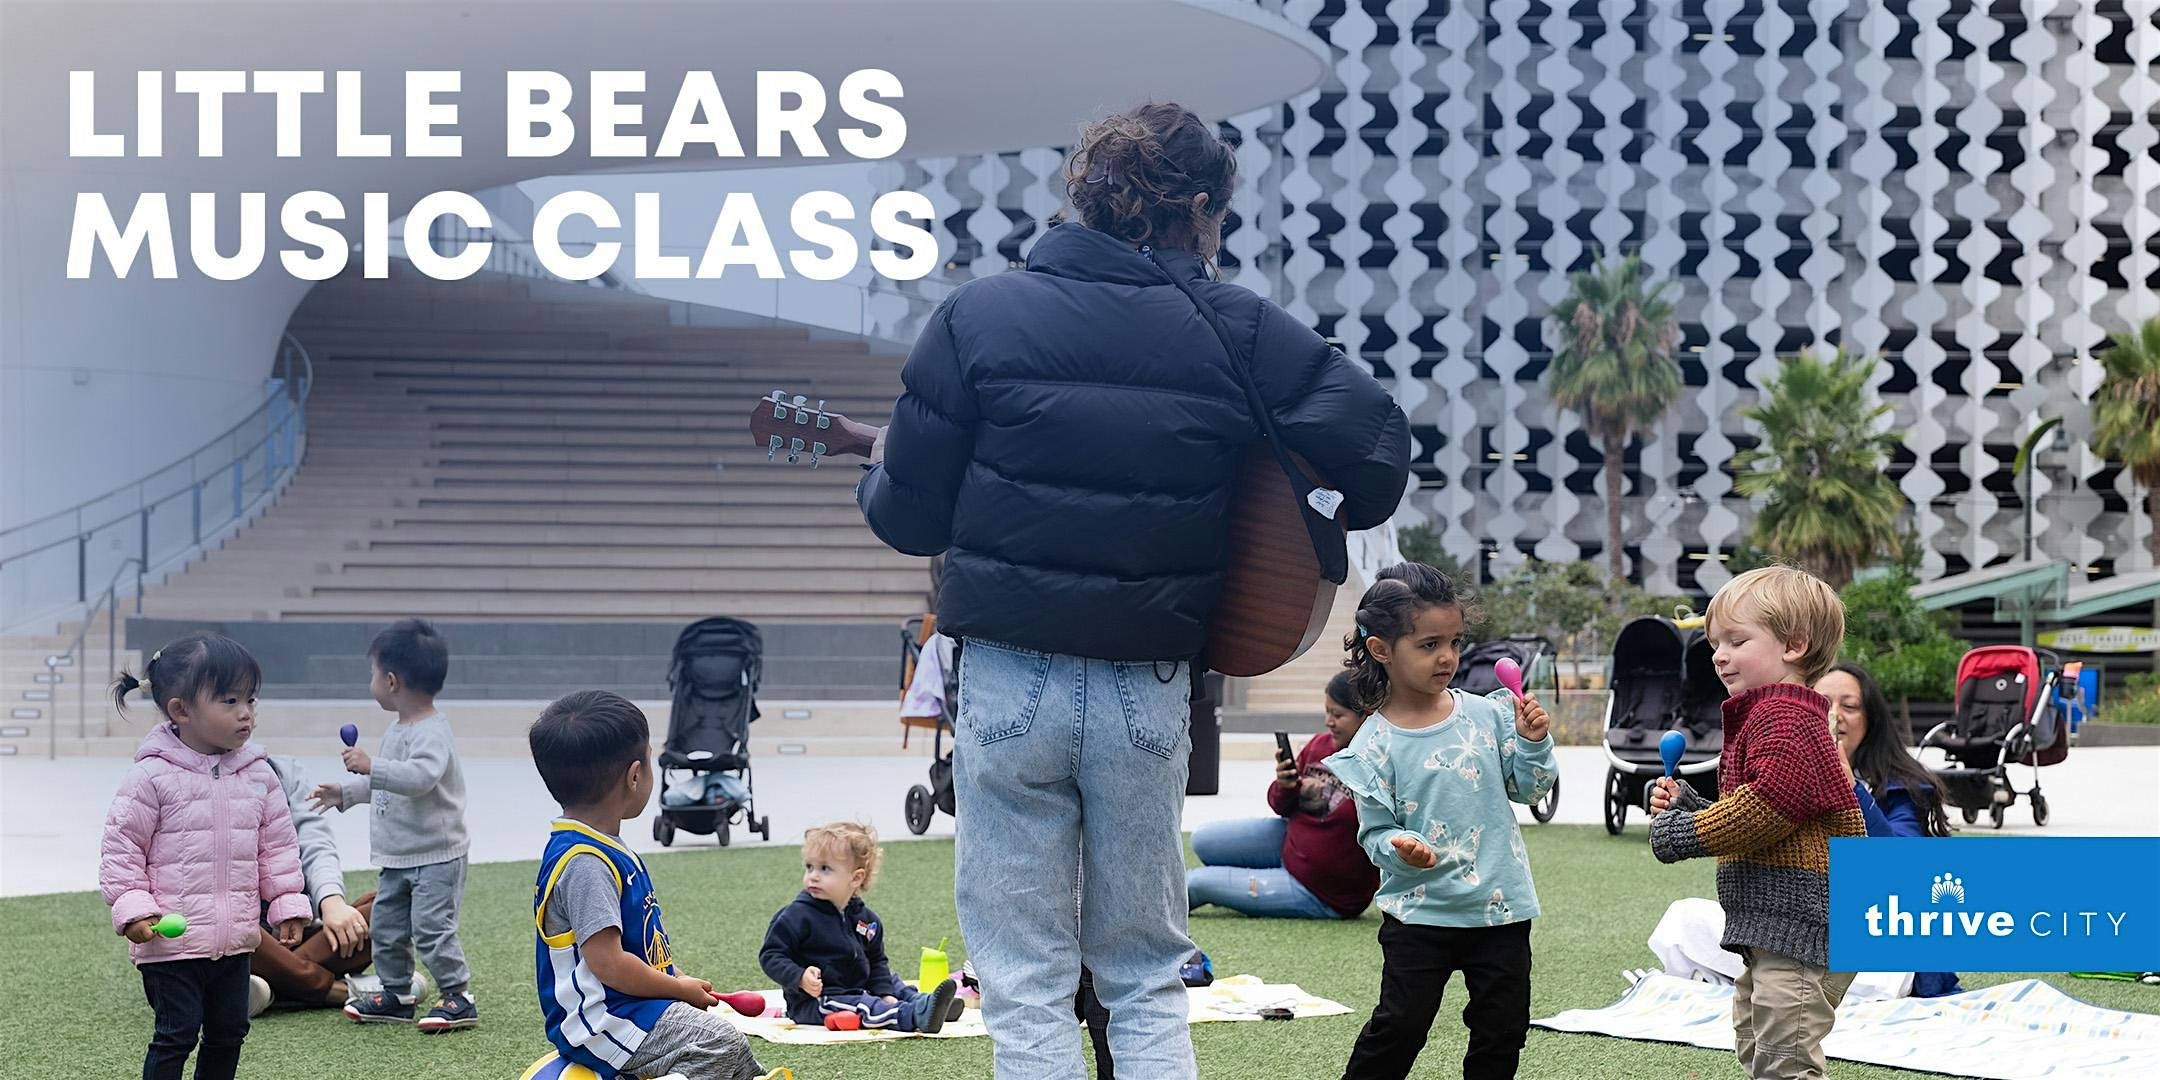 Little Bears Music Class for Babies, Toddlers and Preschoolers